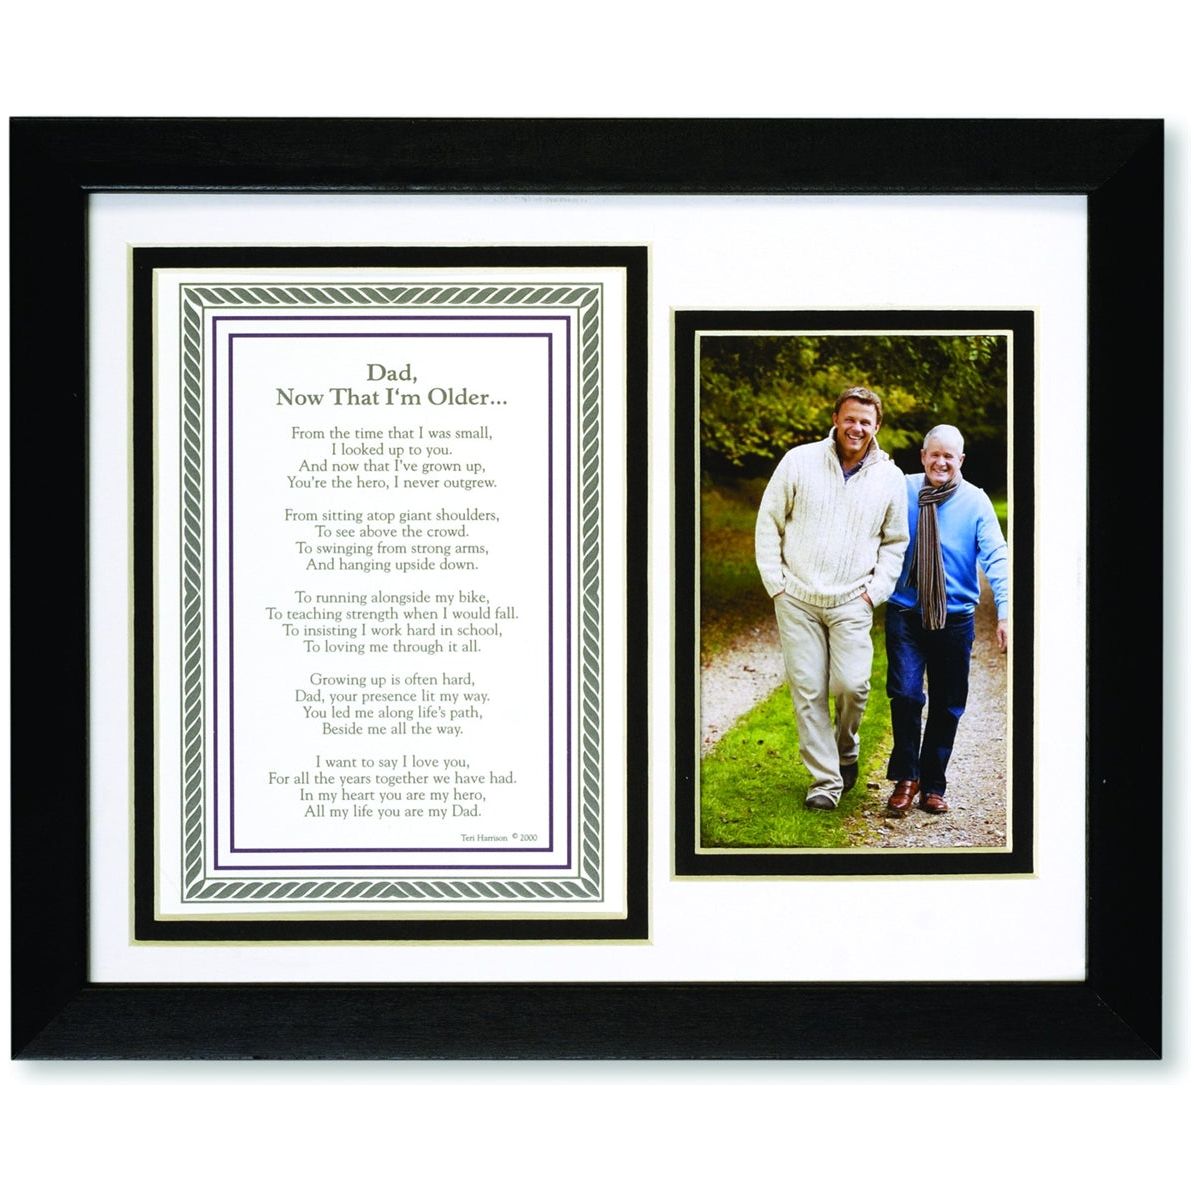 Gift for Dad: 8x10 black frame with white and black double mat, includes "Dad, Now That I'm Older" poem and space for photo.